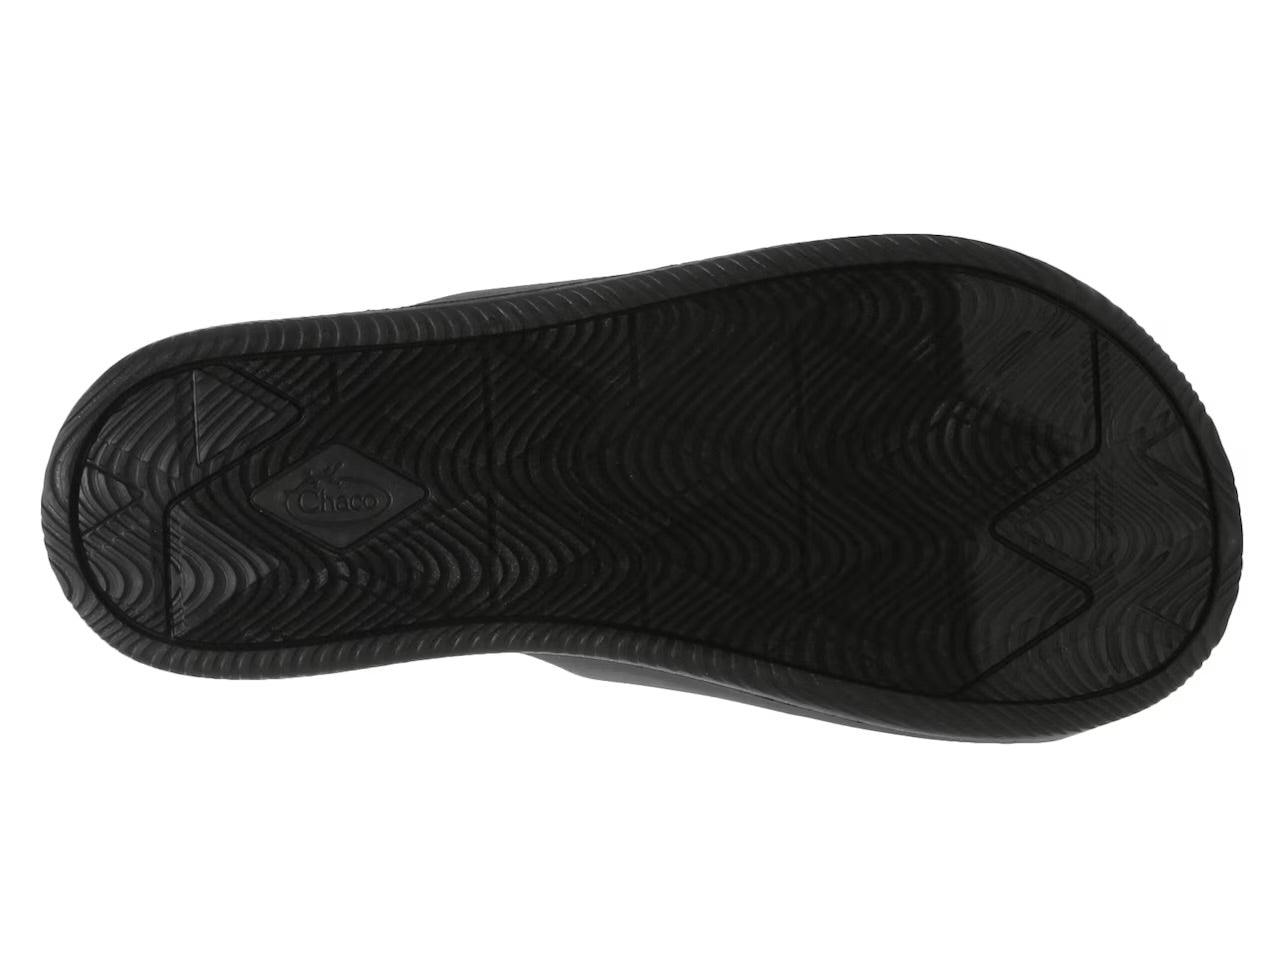 Chaco - Chaco Men’s Chillos Slide - The Shoe Collective